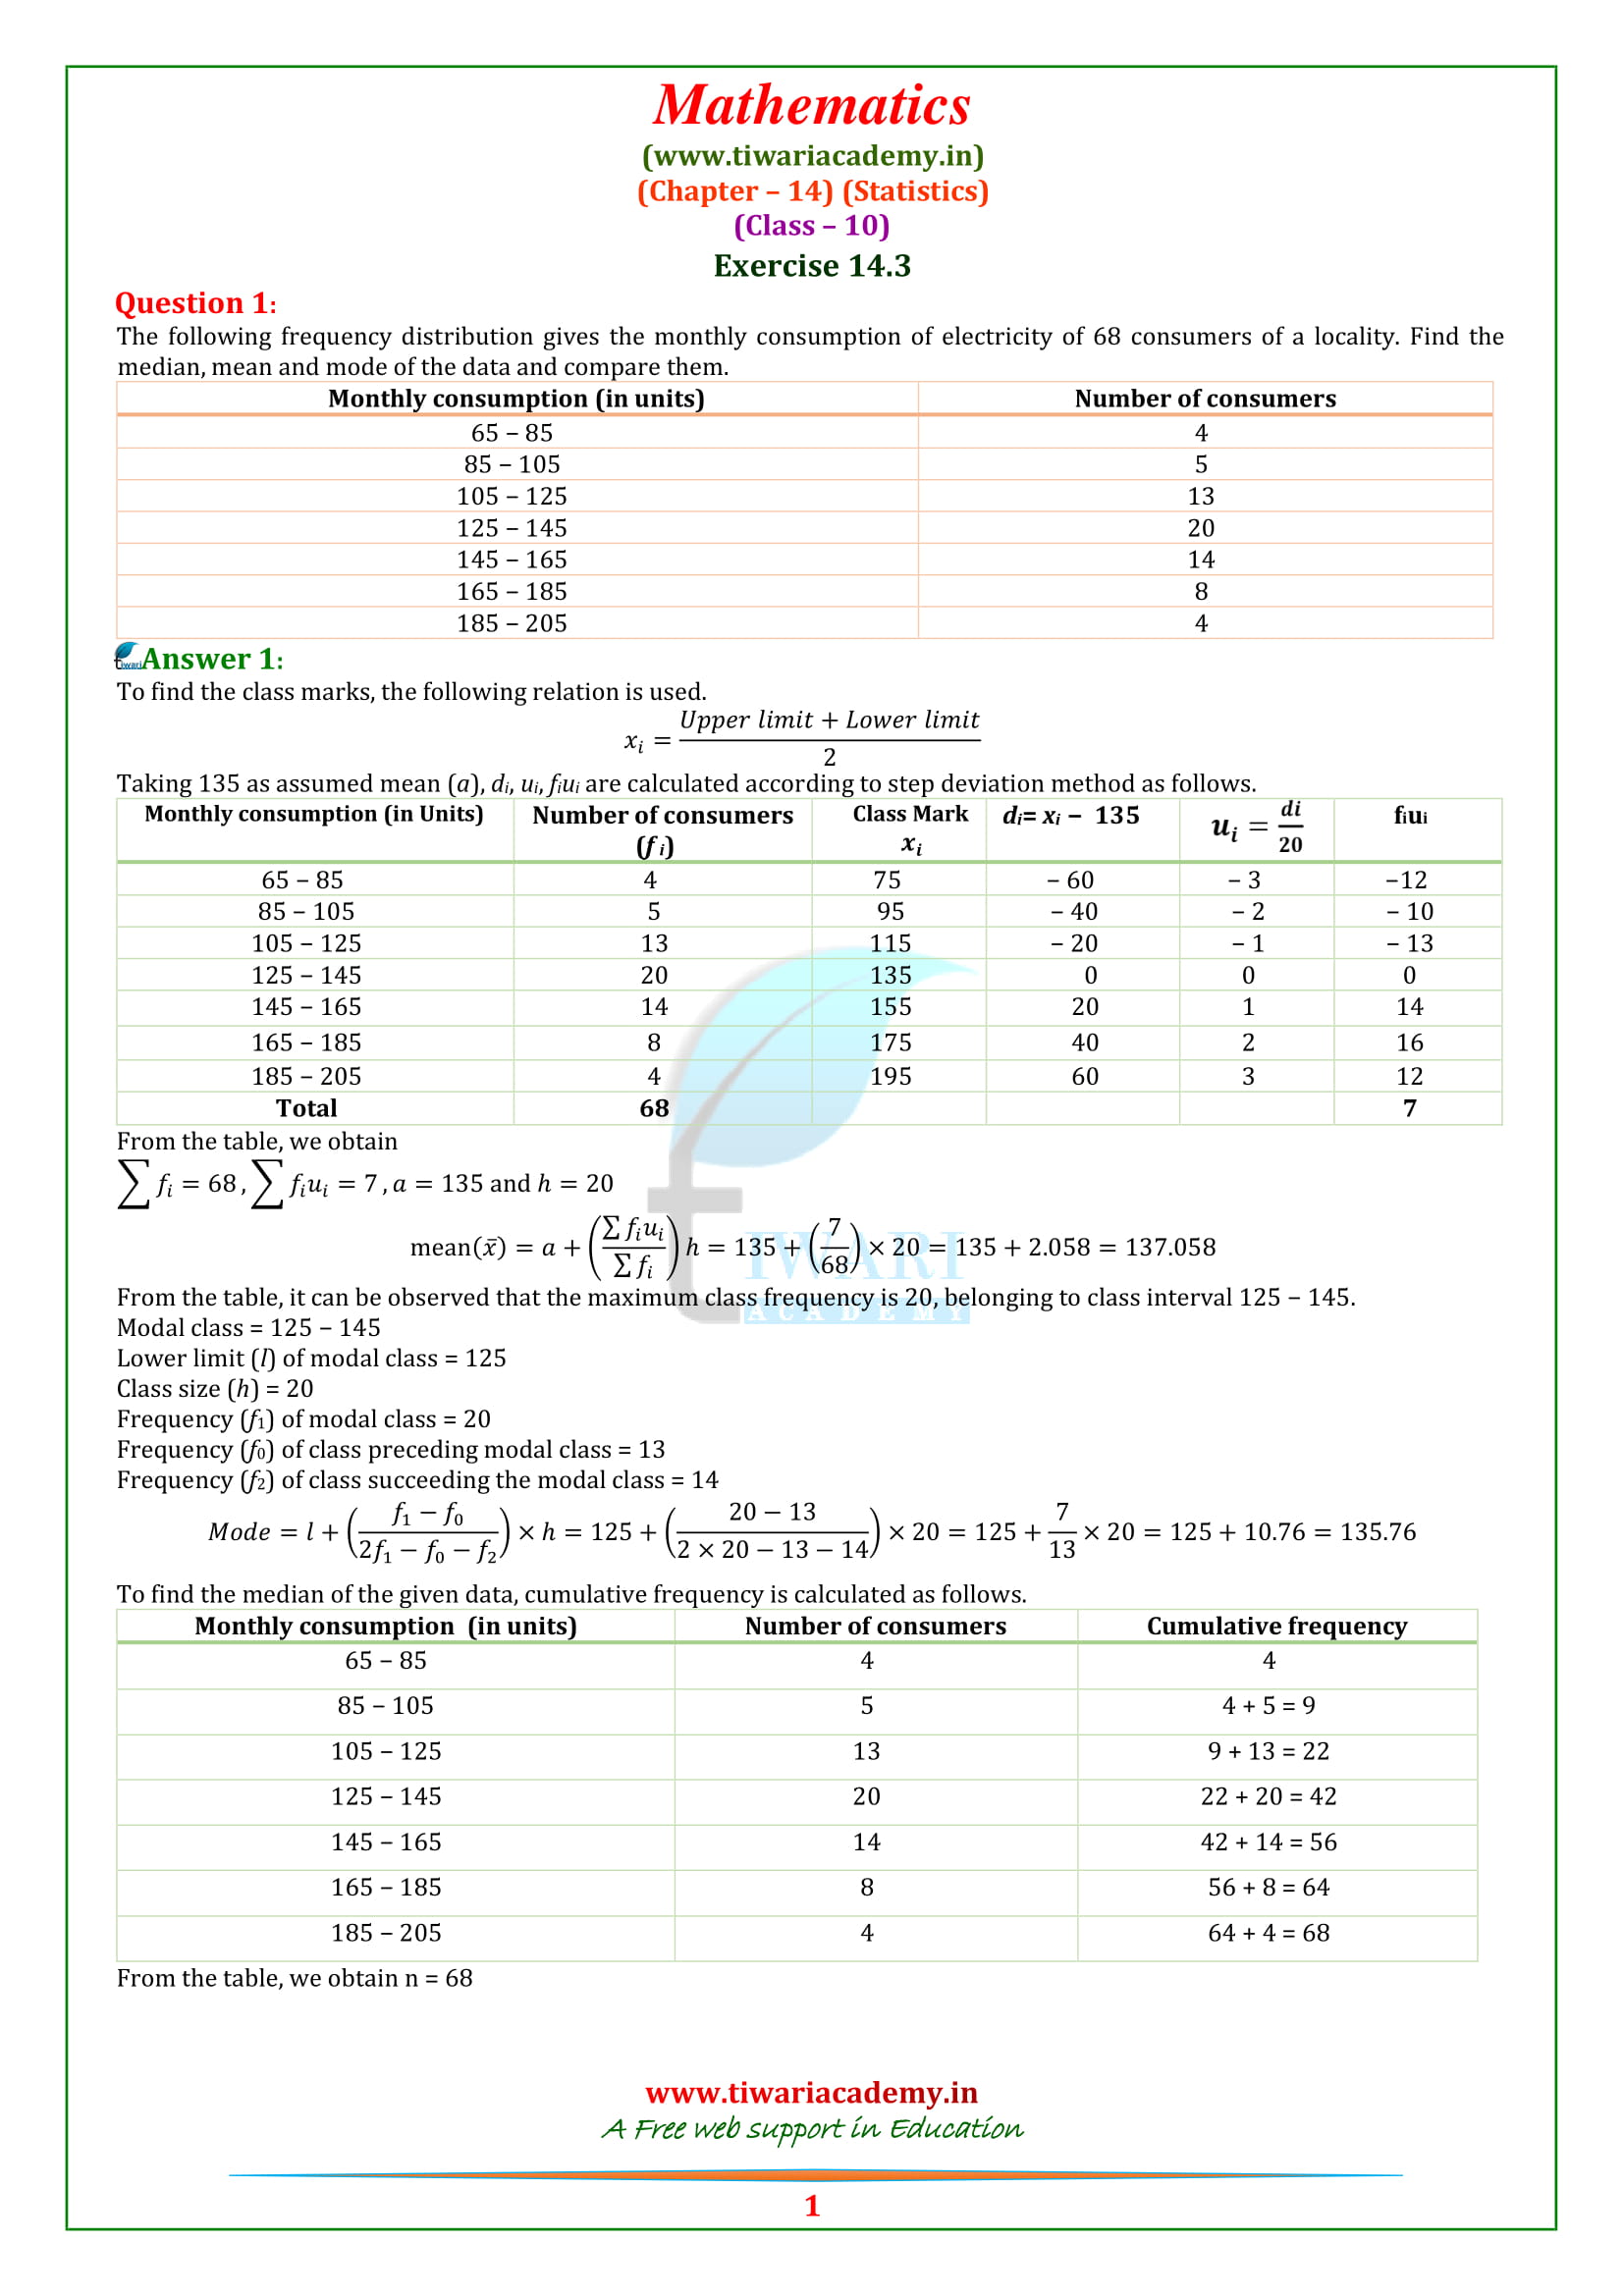 NCERT Solutions for Class 10 Maths Chapter 14 Exercise 14.3 statistics